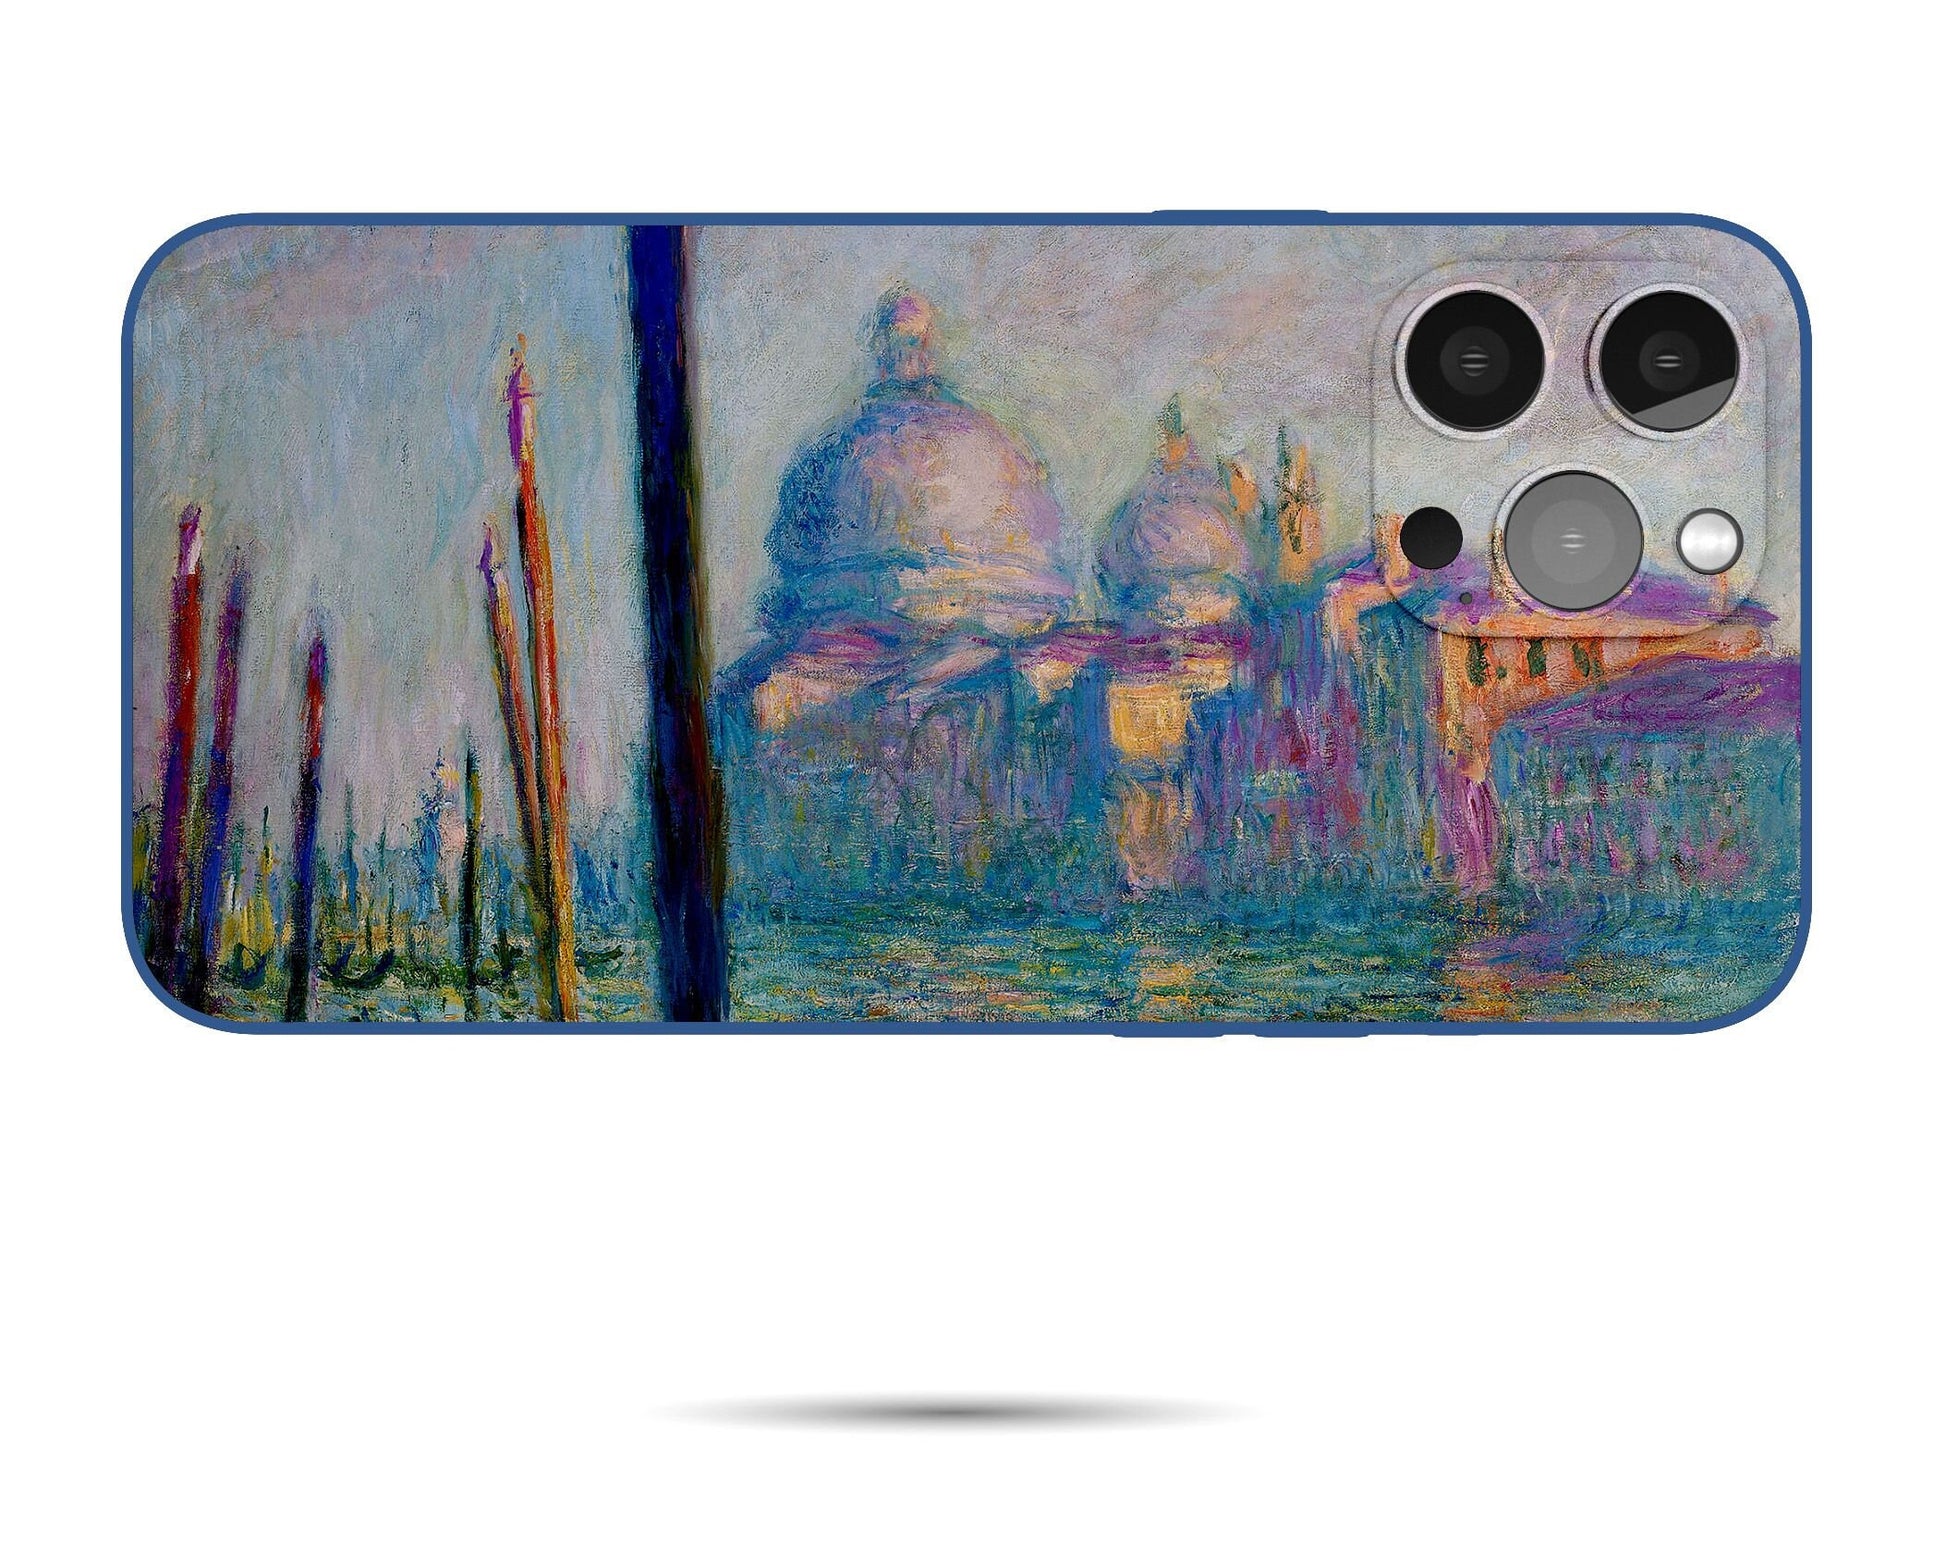 Claude Monet The Grand Canal In Venice Iphone Cover, Iphone 11 Pro Max, Iphone Se 2020 Case, Iphone Case Protective, Iphone Case Silicone